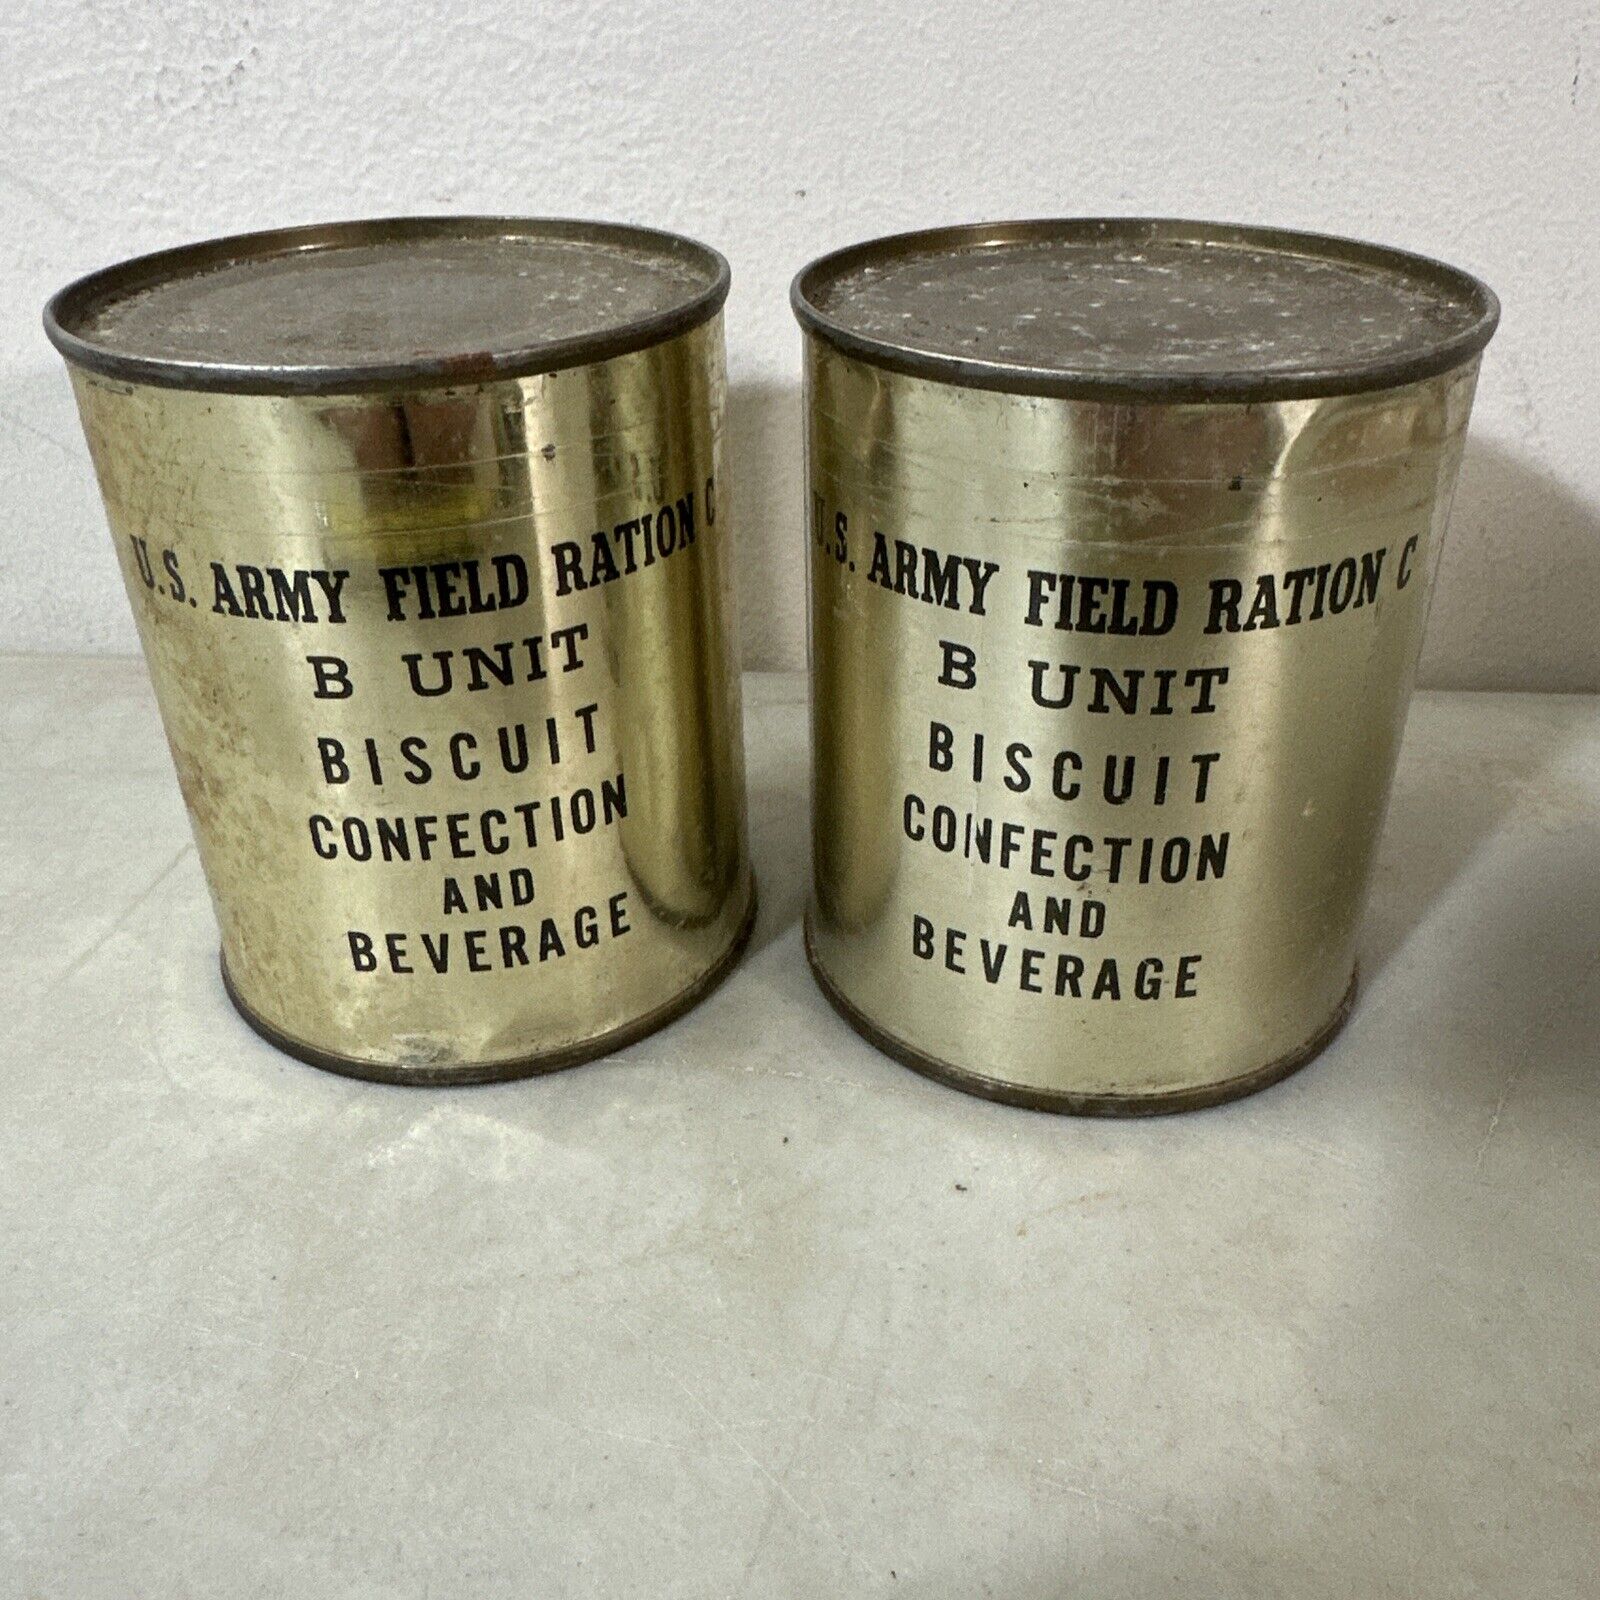 x2 October 1942 WWII U.S. Army Field Ration C Biscuit Confection Beverage B Unit